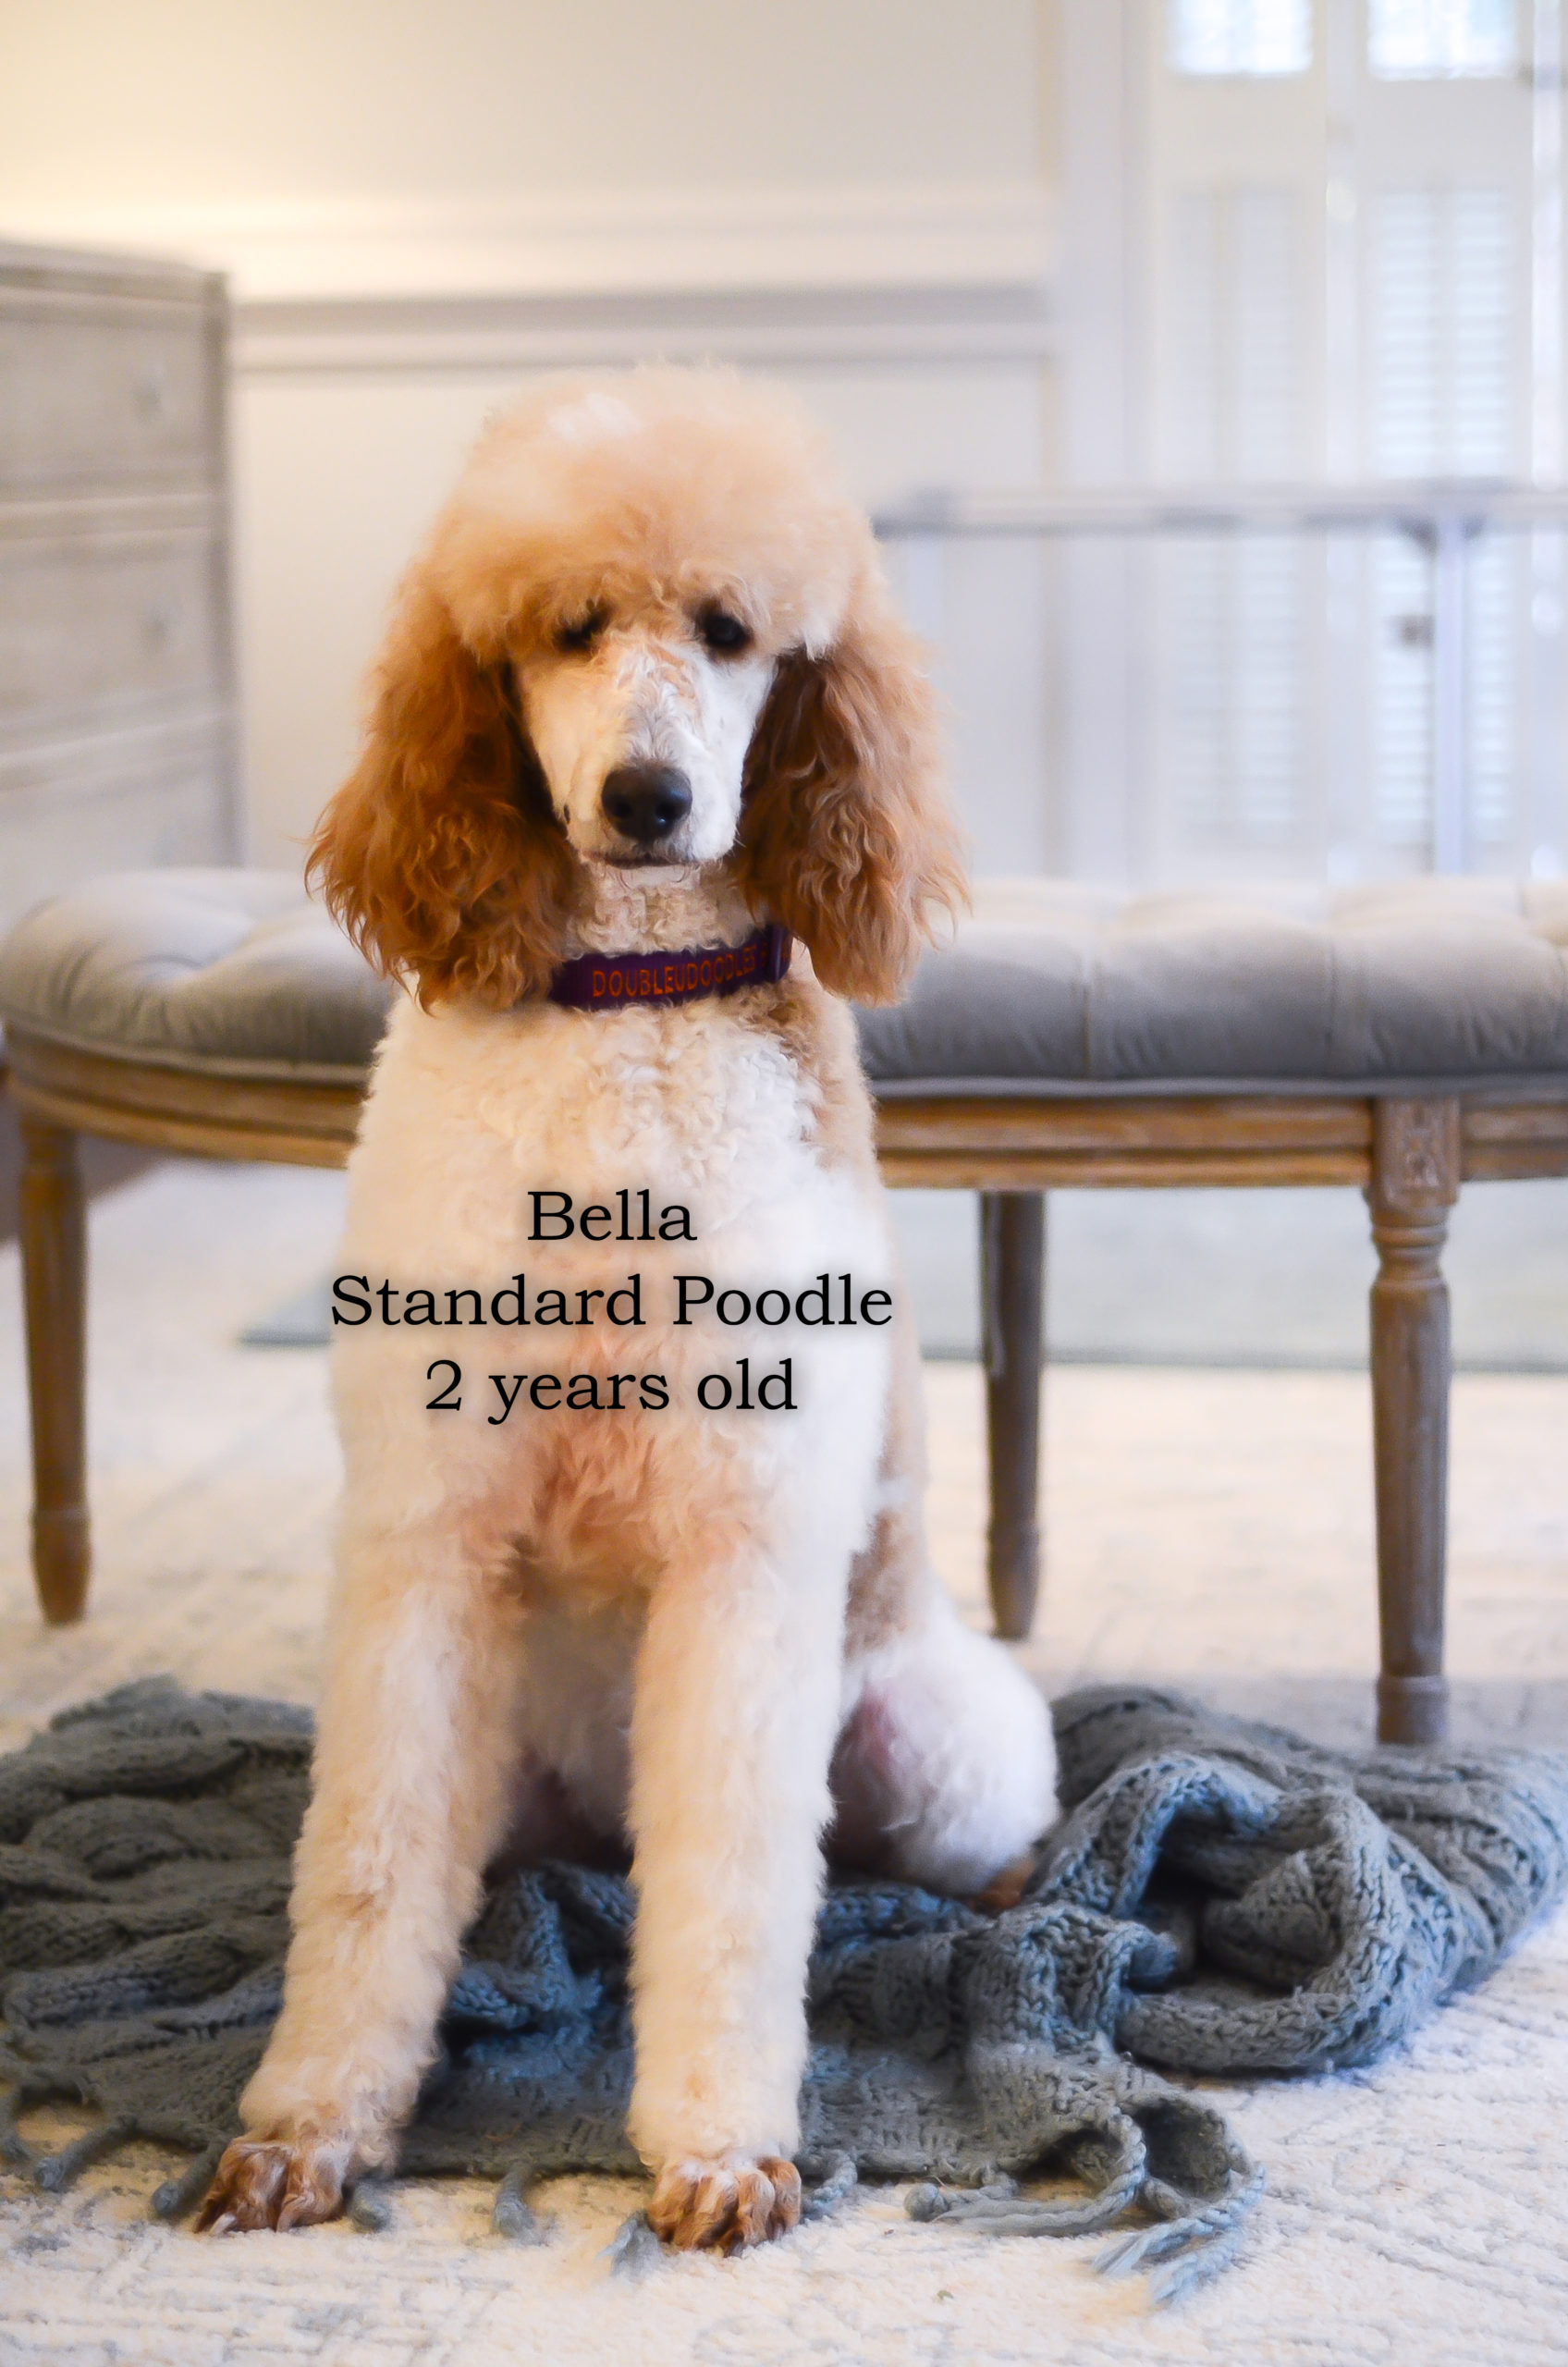 Bella, a 2 year old Standard Poodle